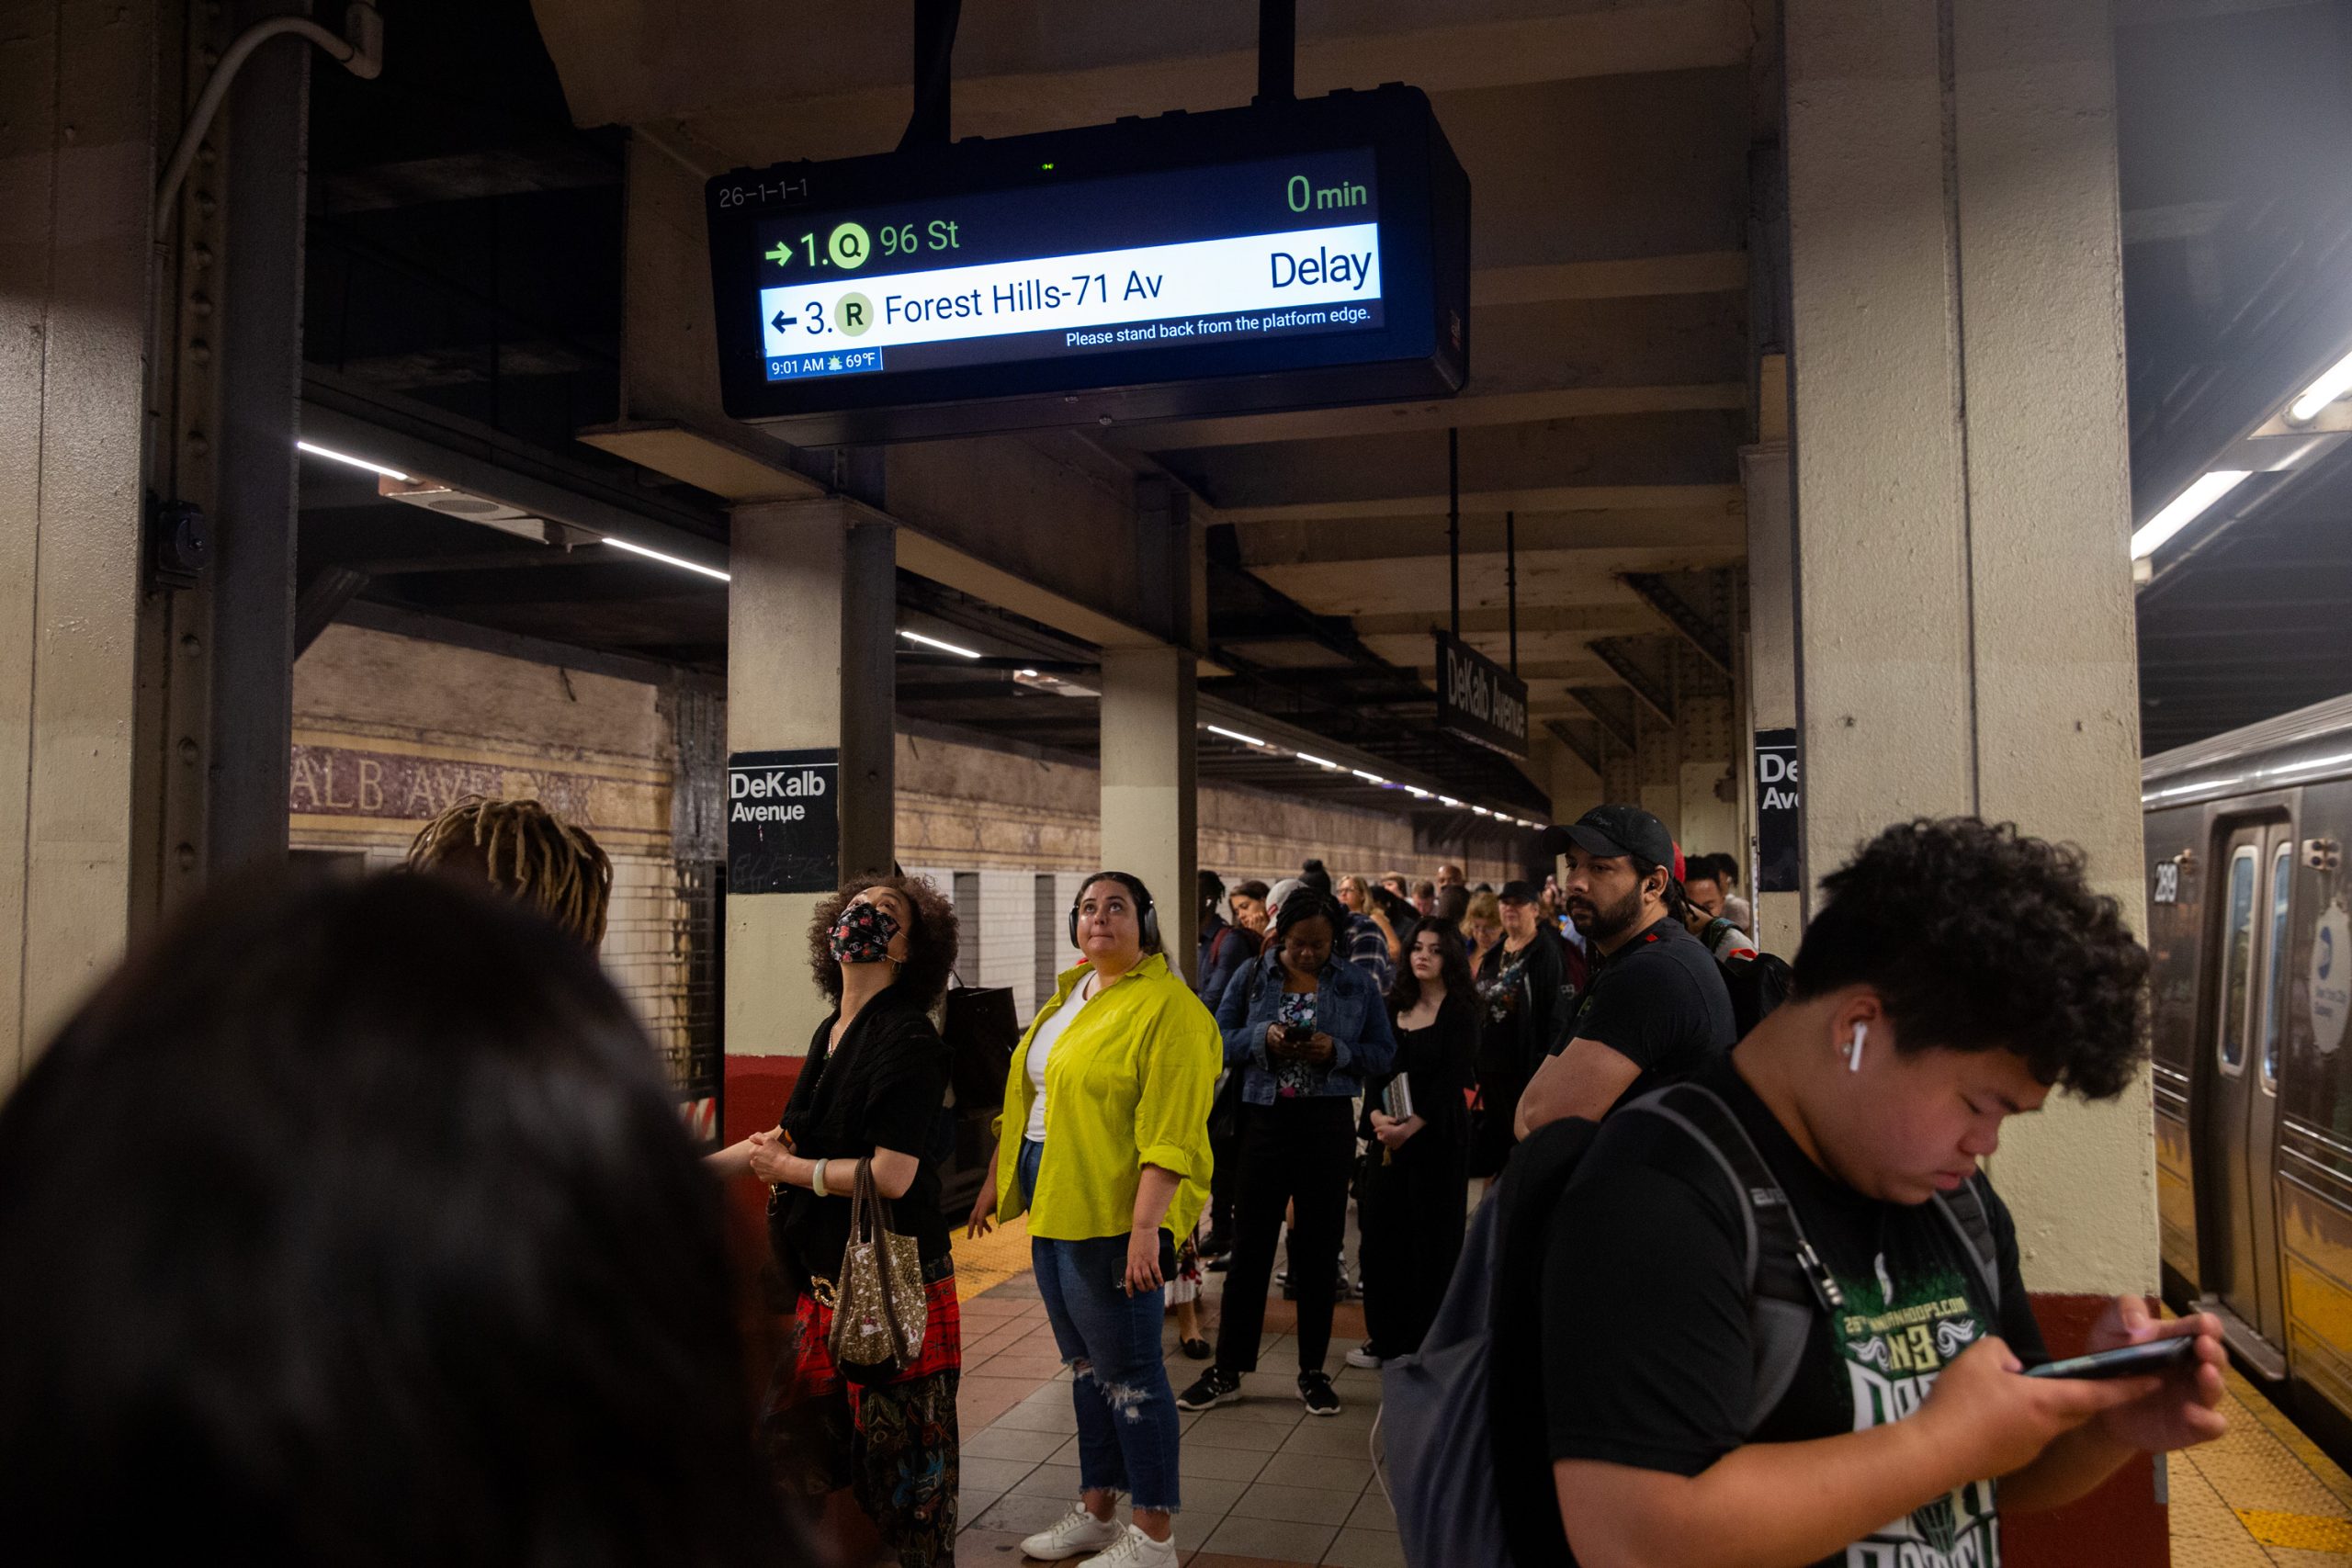 Morning commuters deal with delays on the R line in Brooklyn.